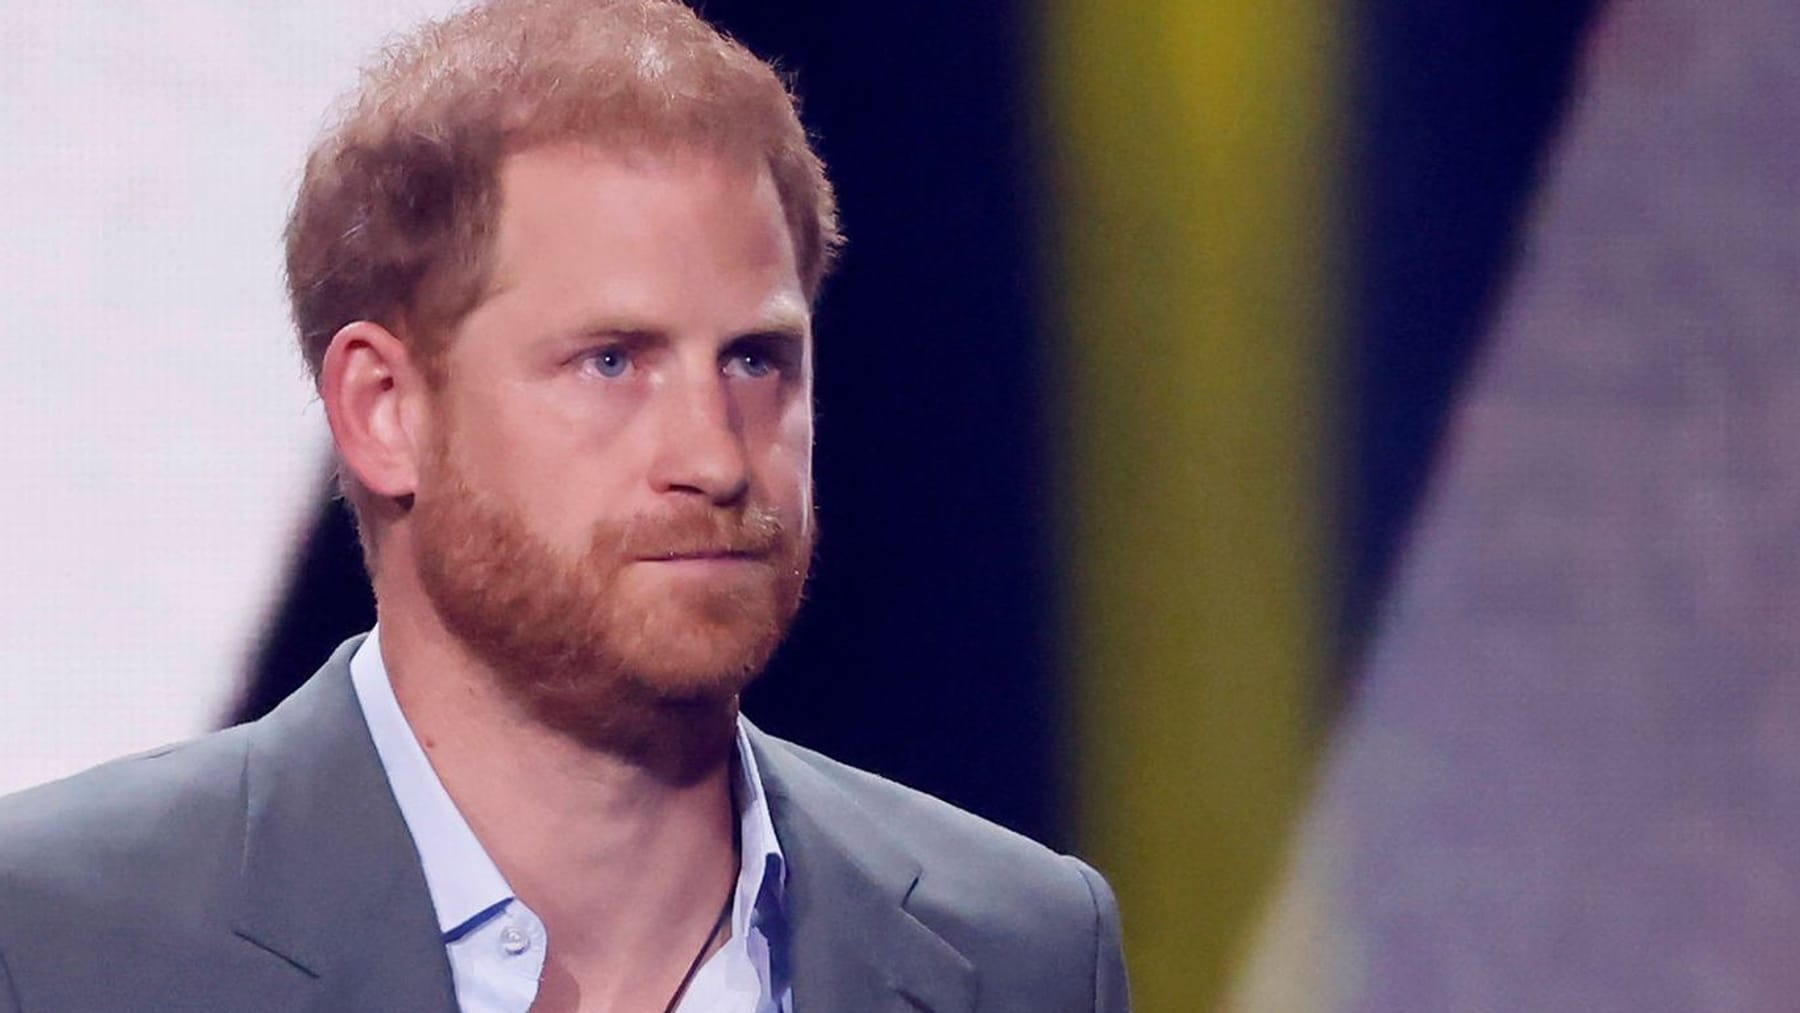 Prince Harry travels to Great Britain: will Meghan accompany him?